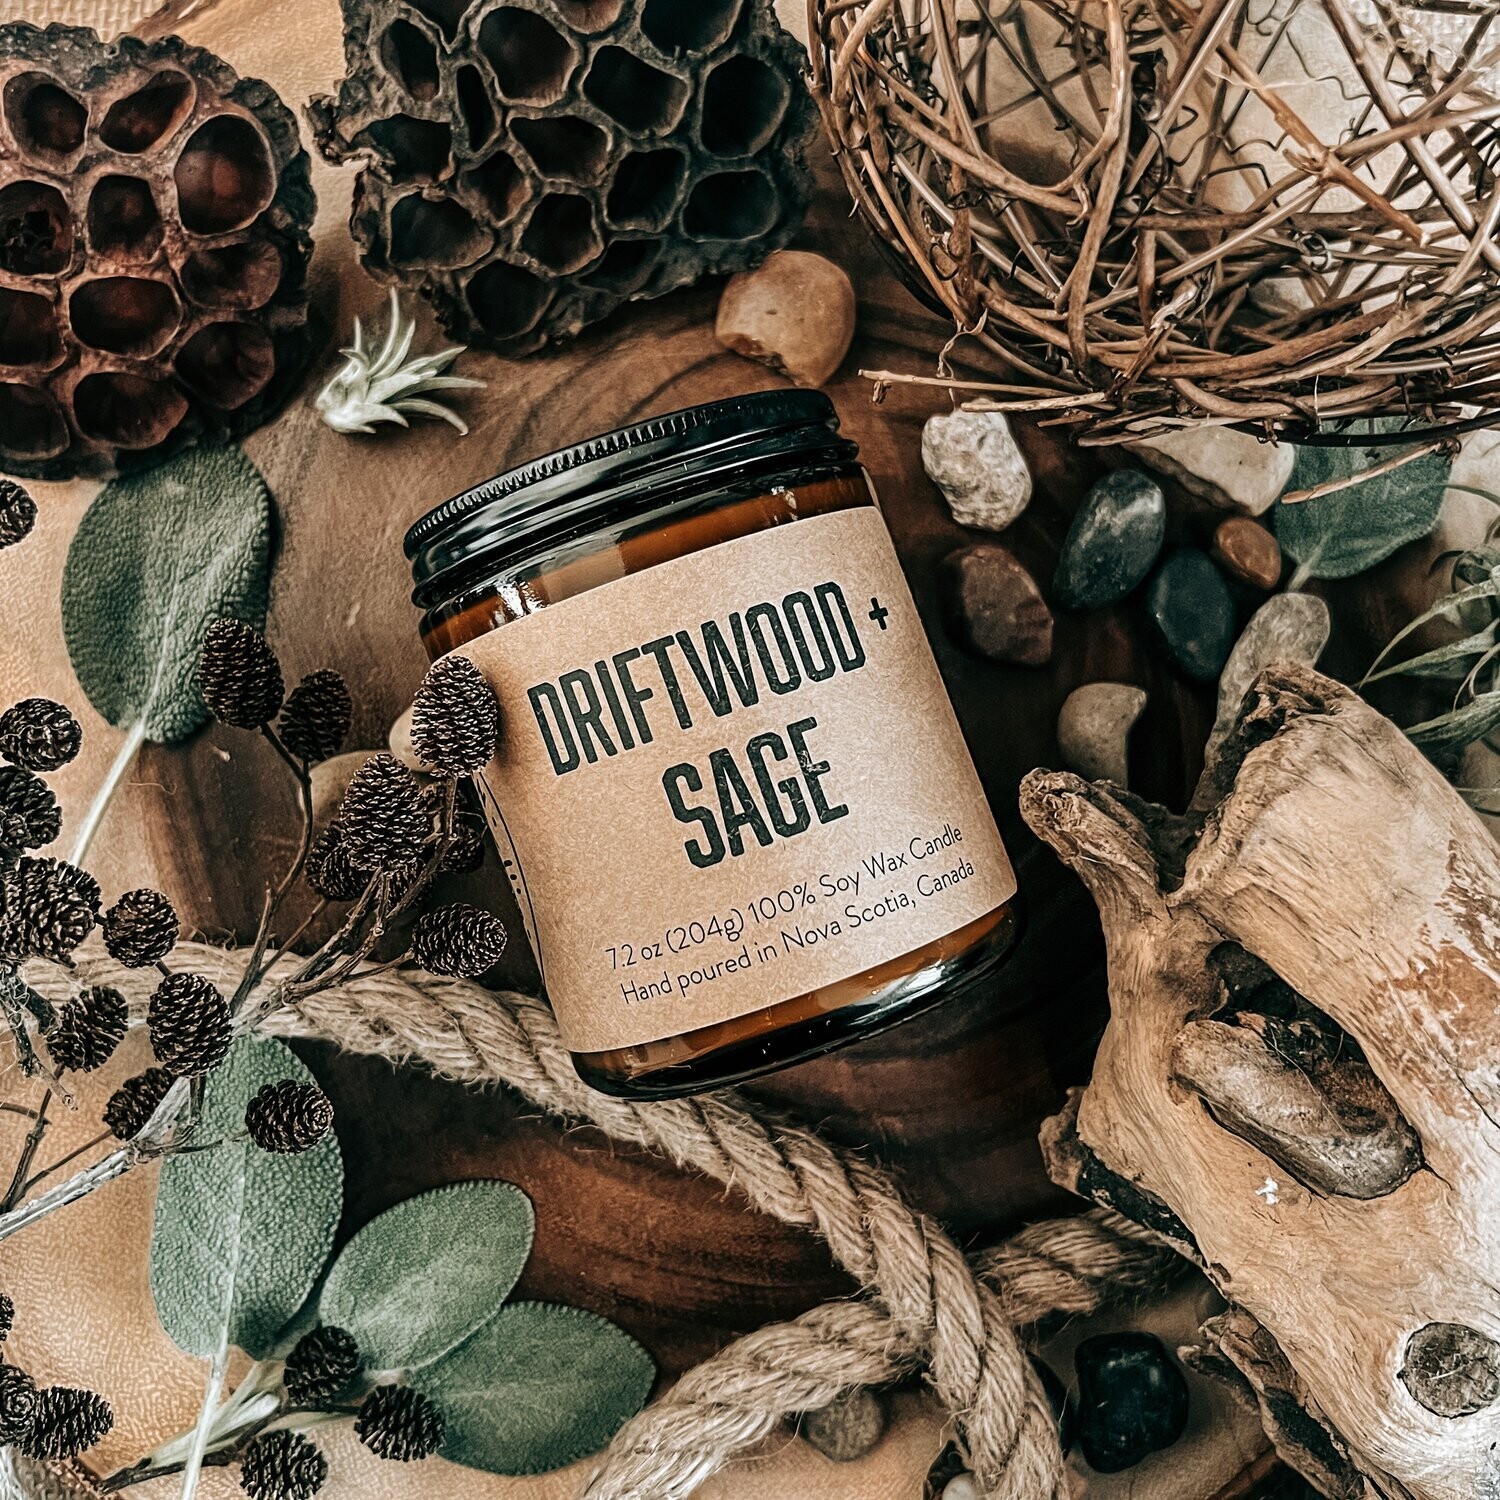 Driftwood and Sage - Lawrencetown Candle Co